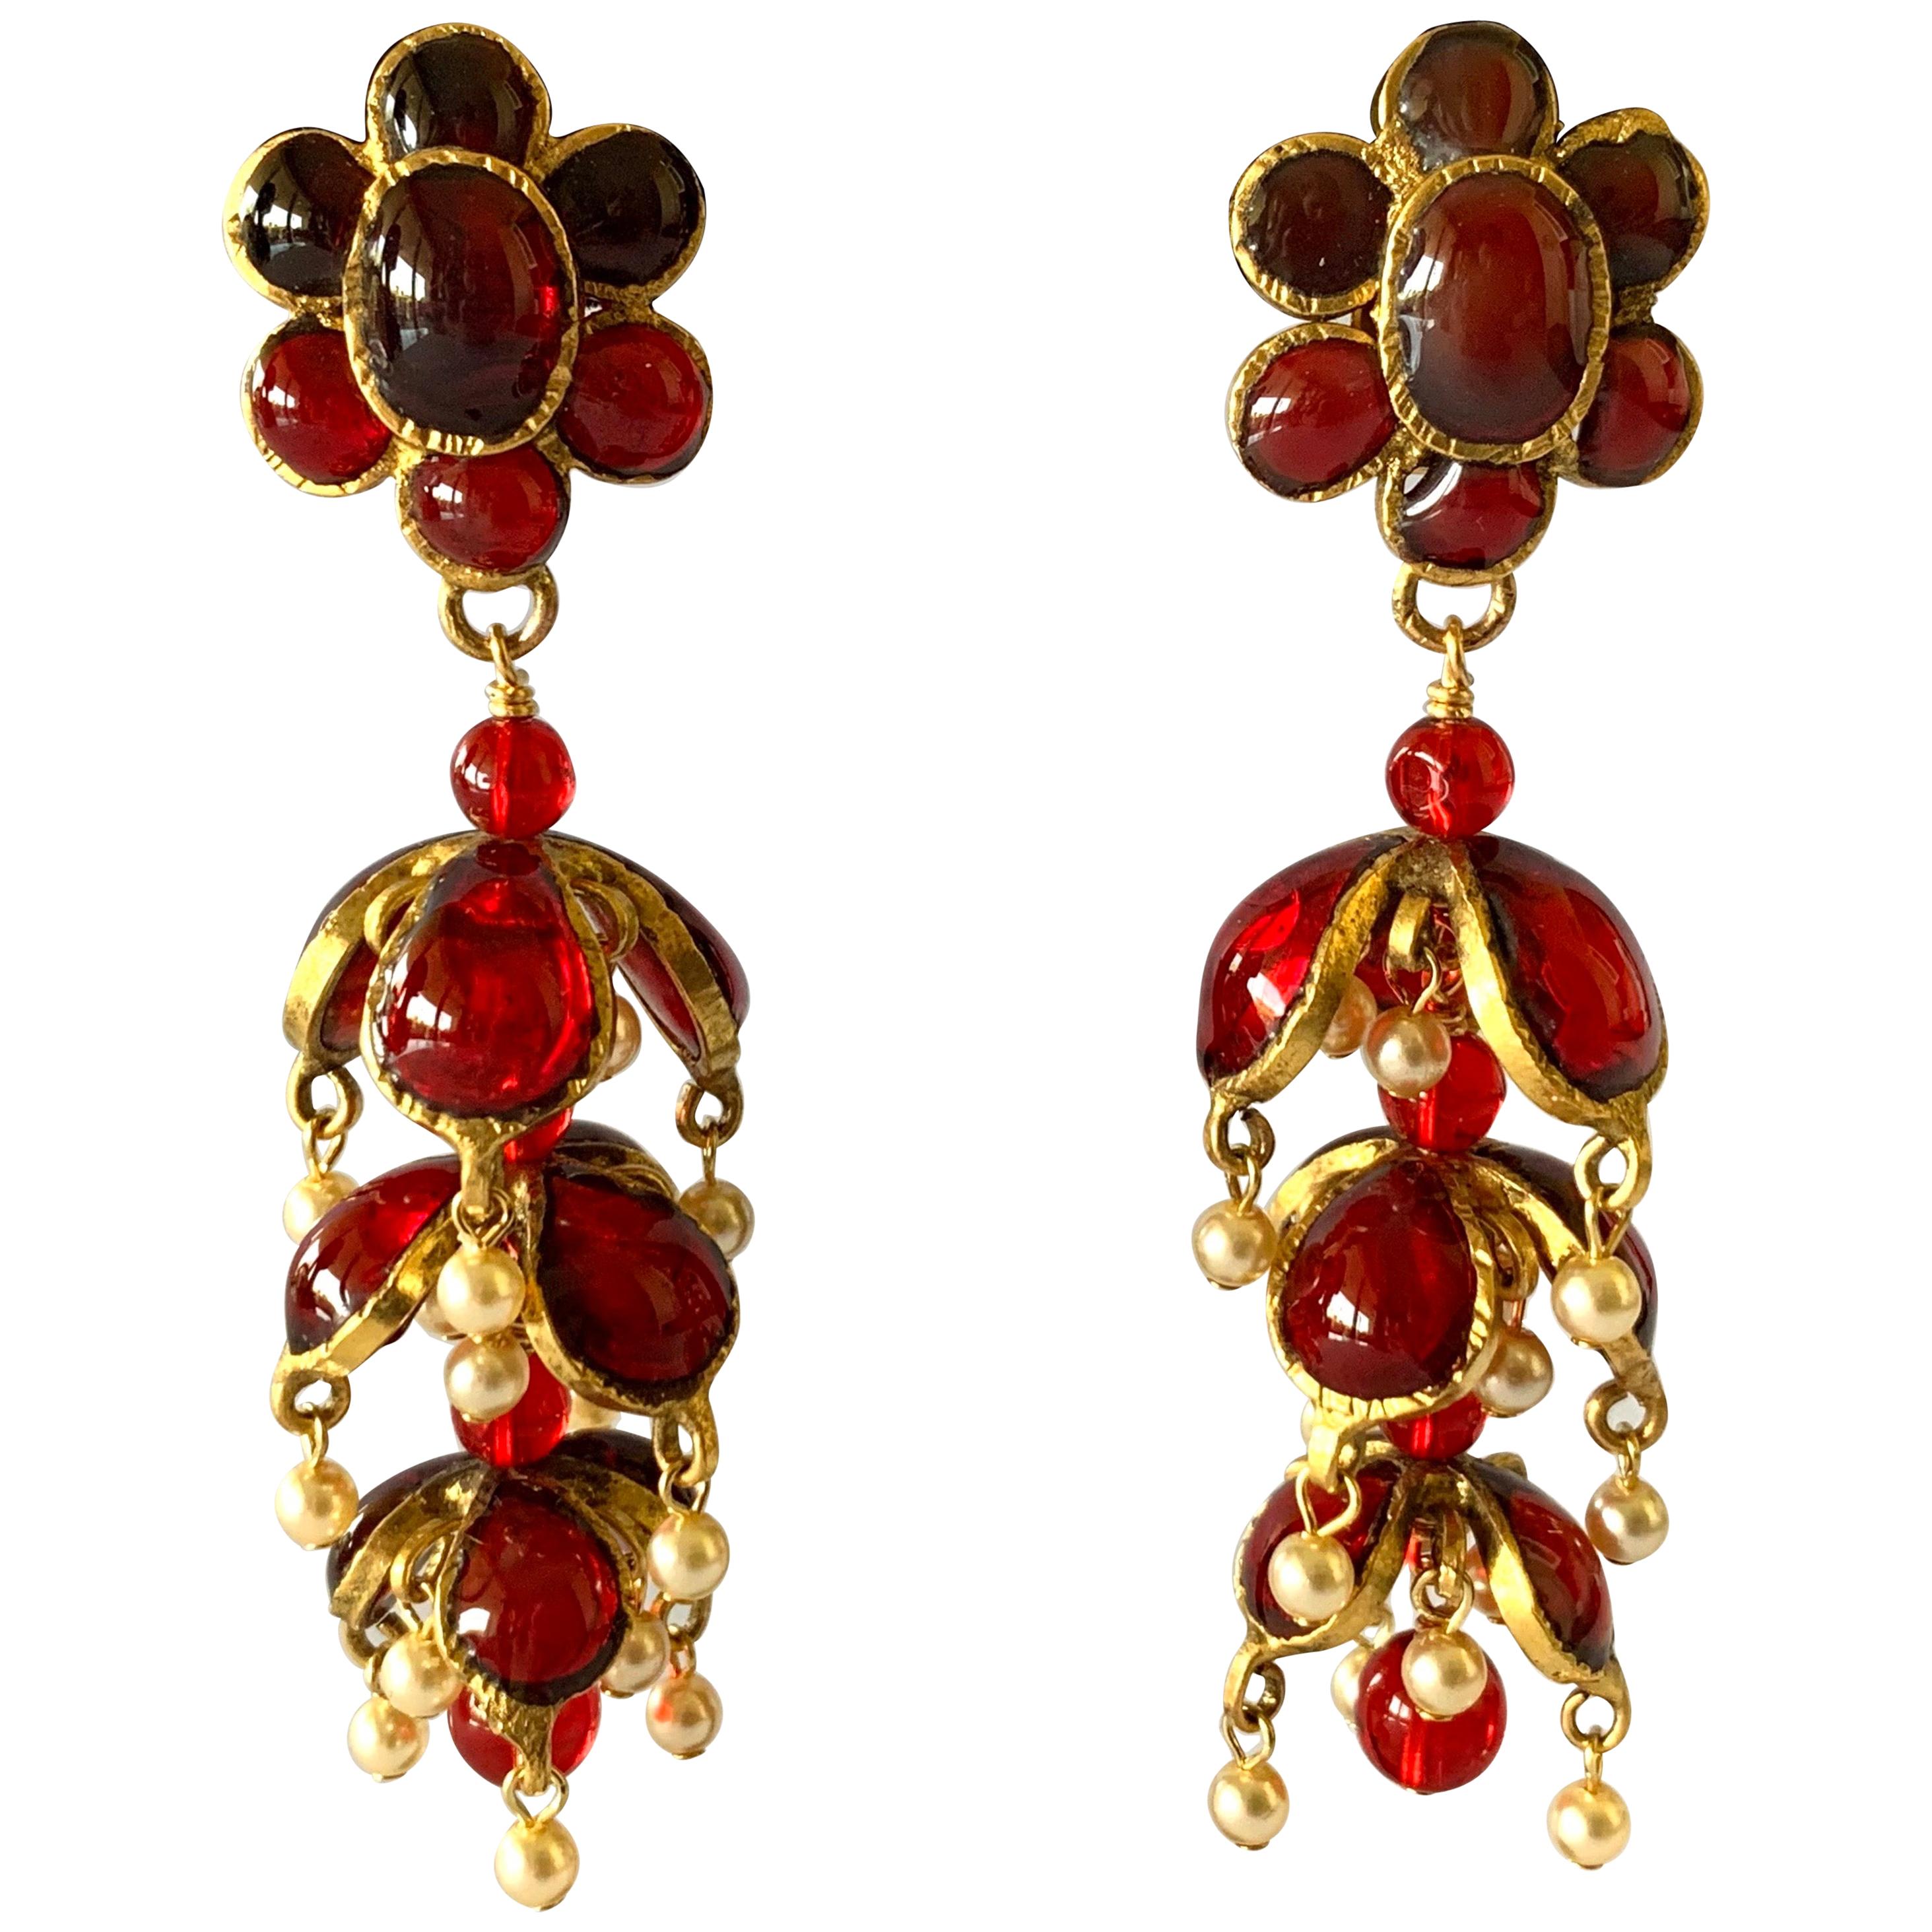 Vintage Chanel Ruby and Pearl Mughal Statement Earrings